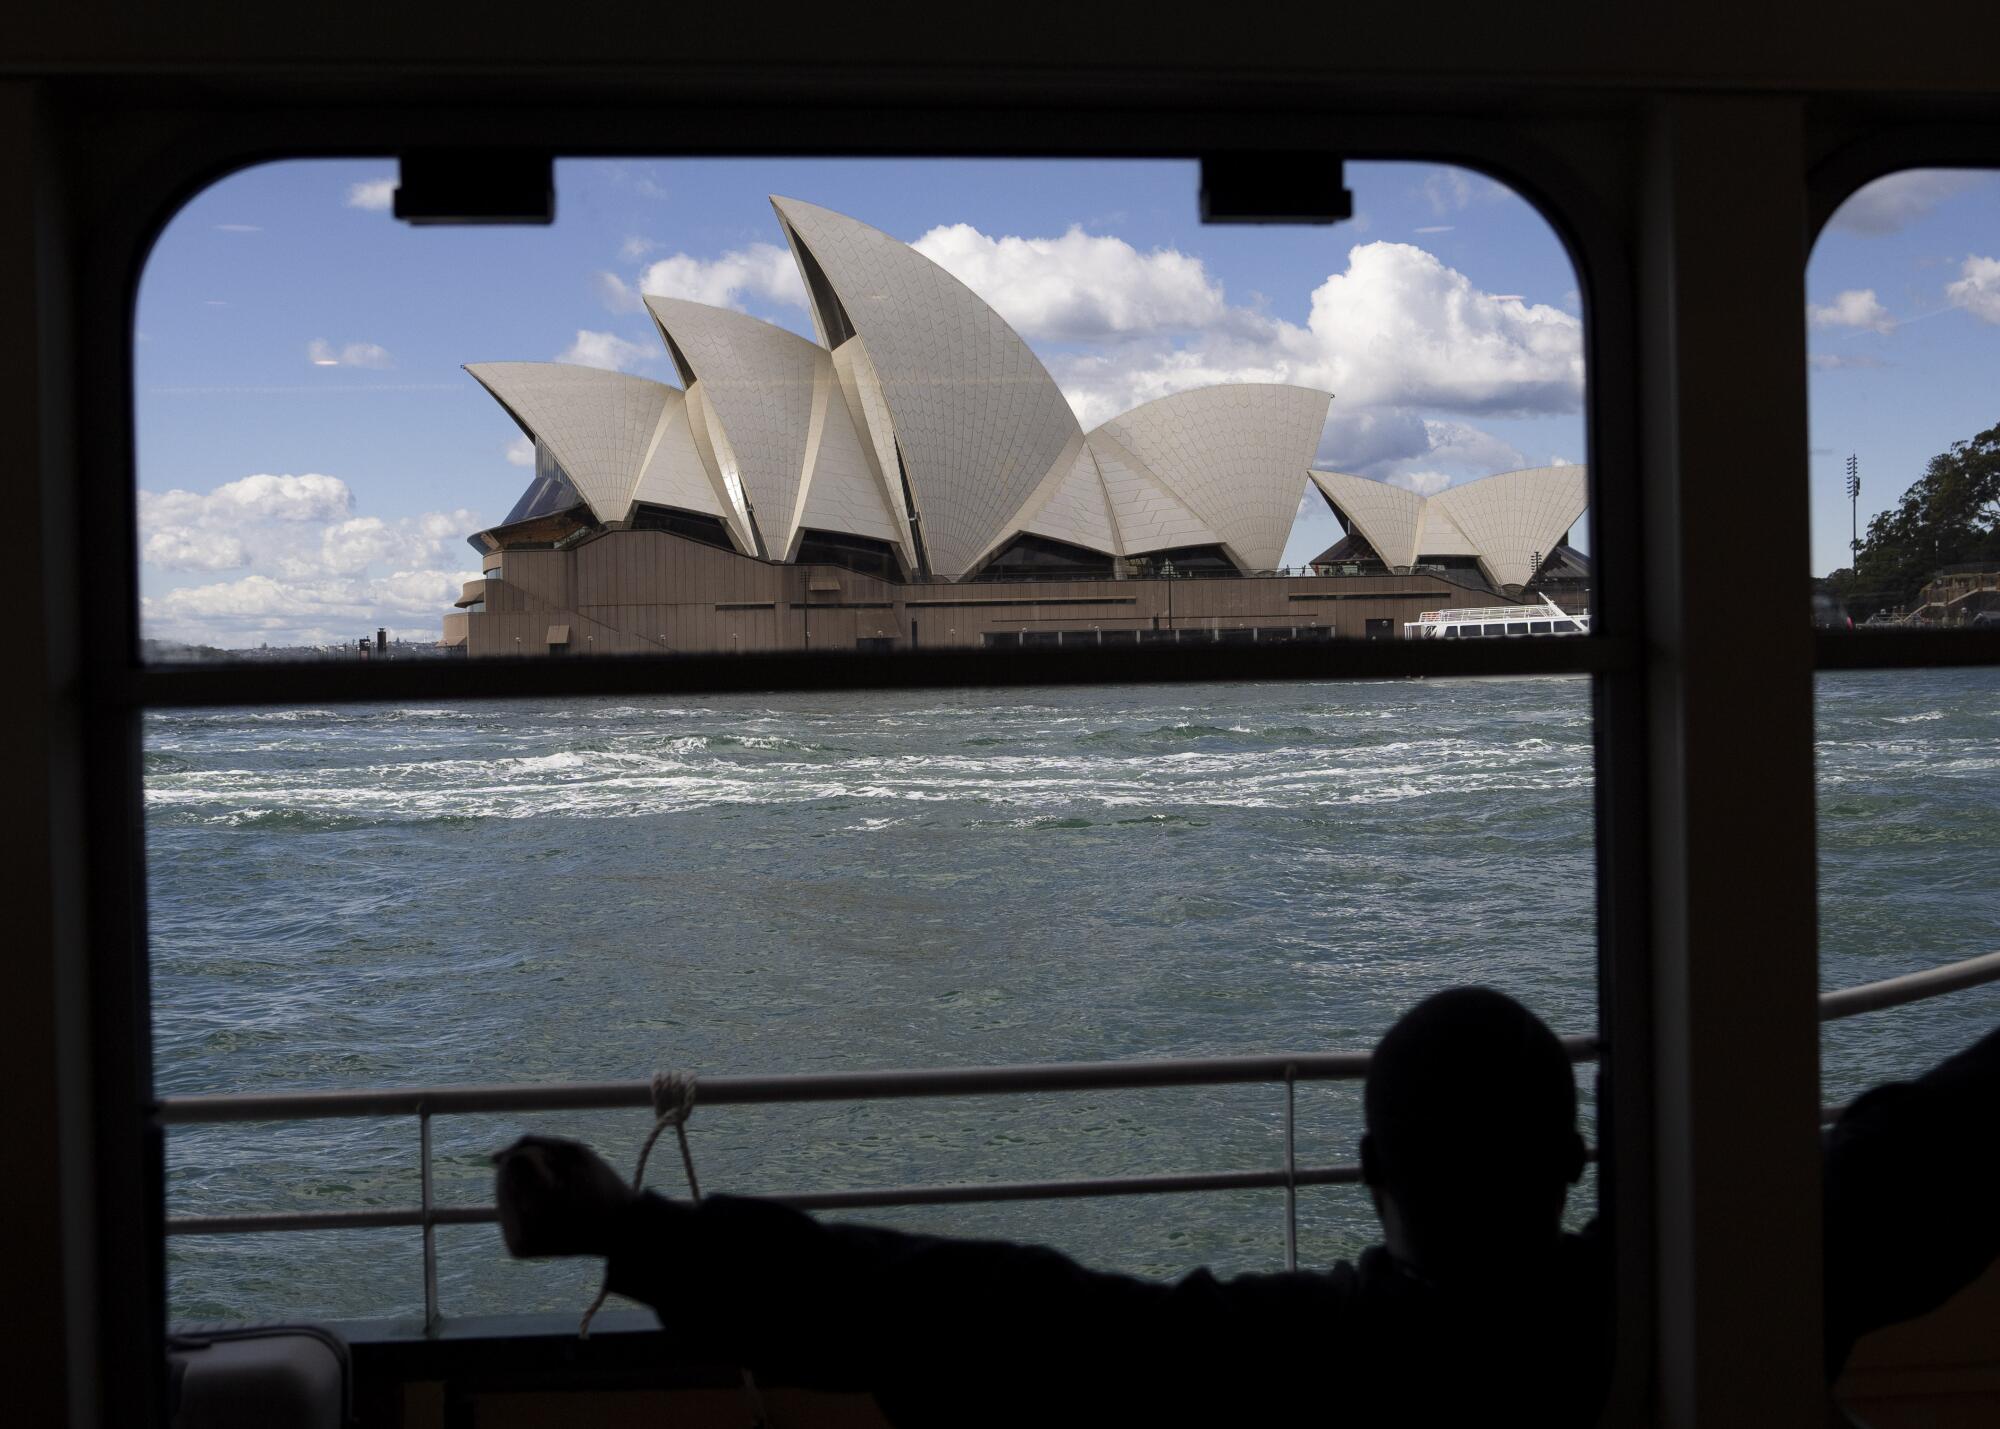 A boat passes by the Sydney Opera House.